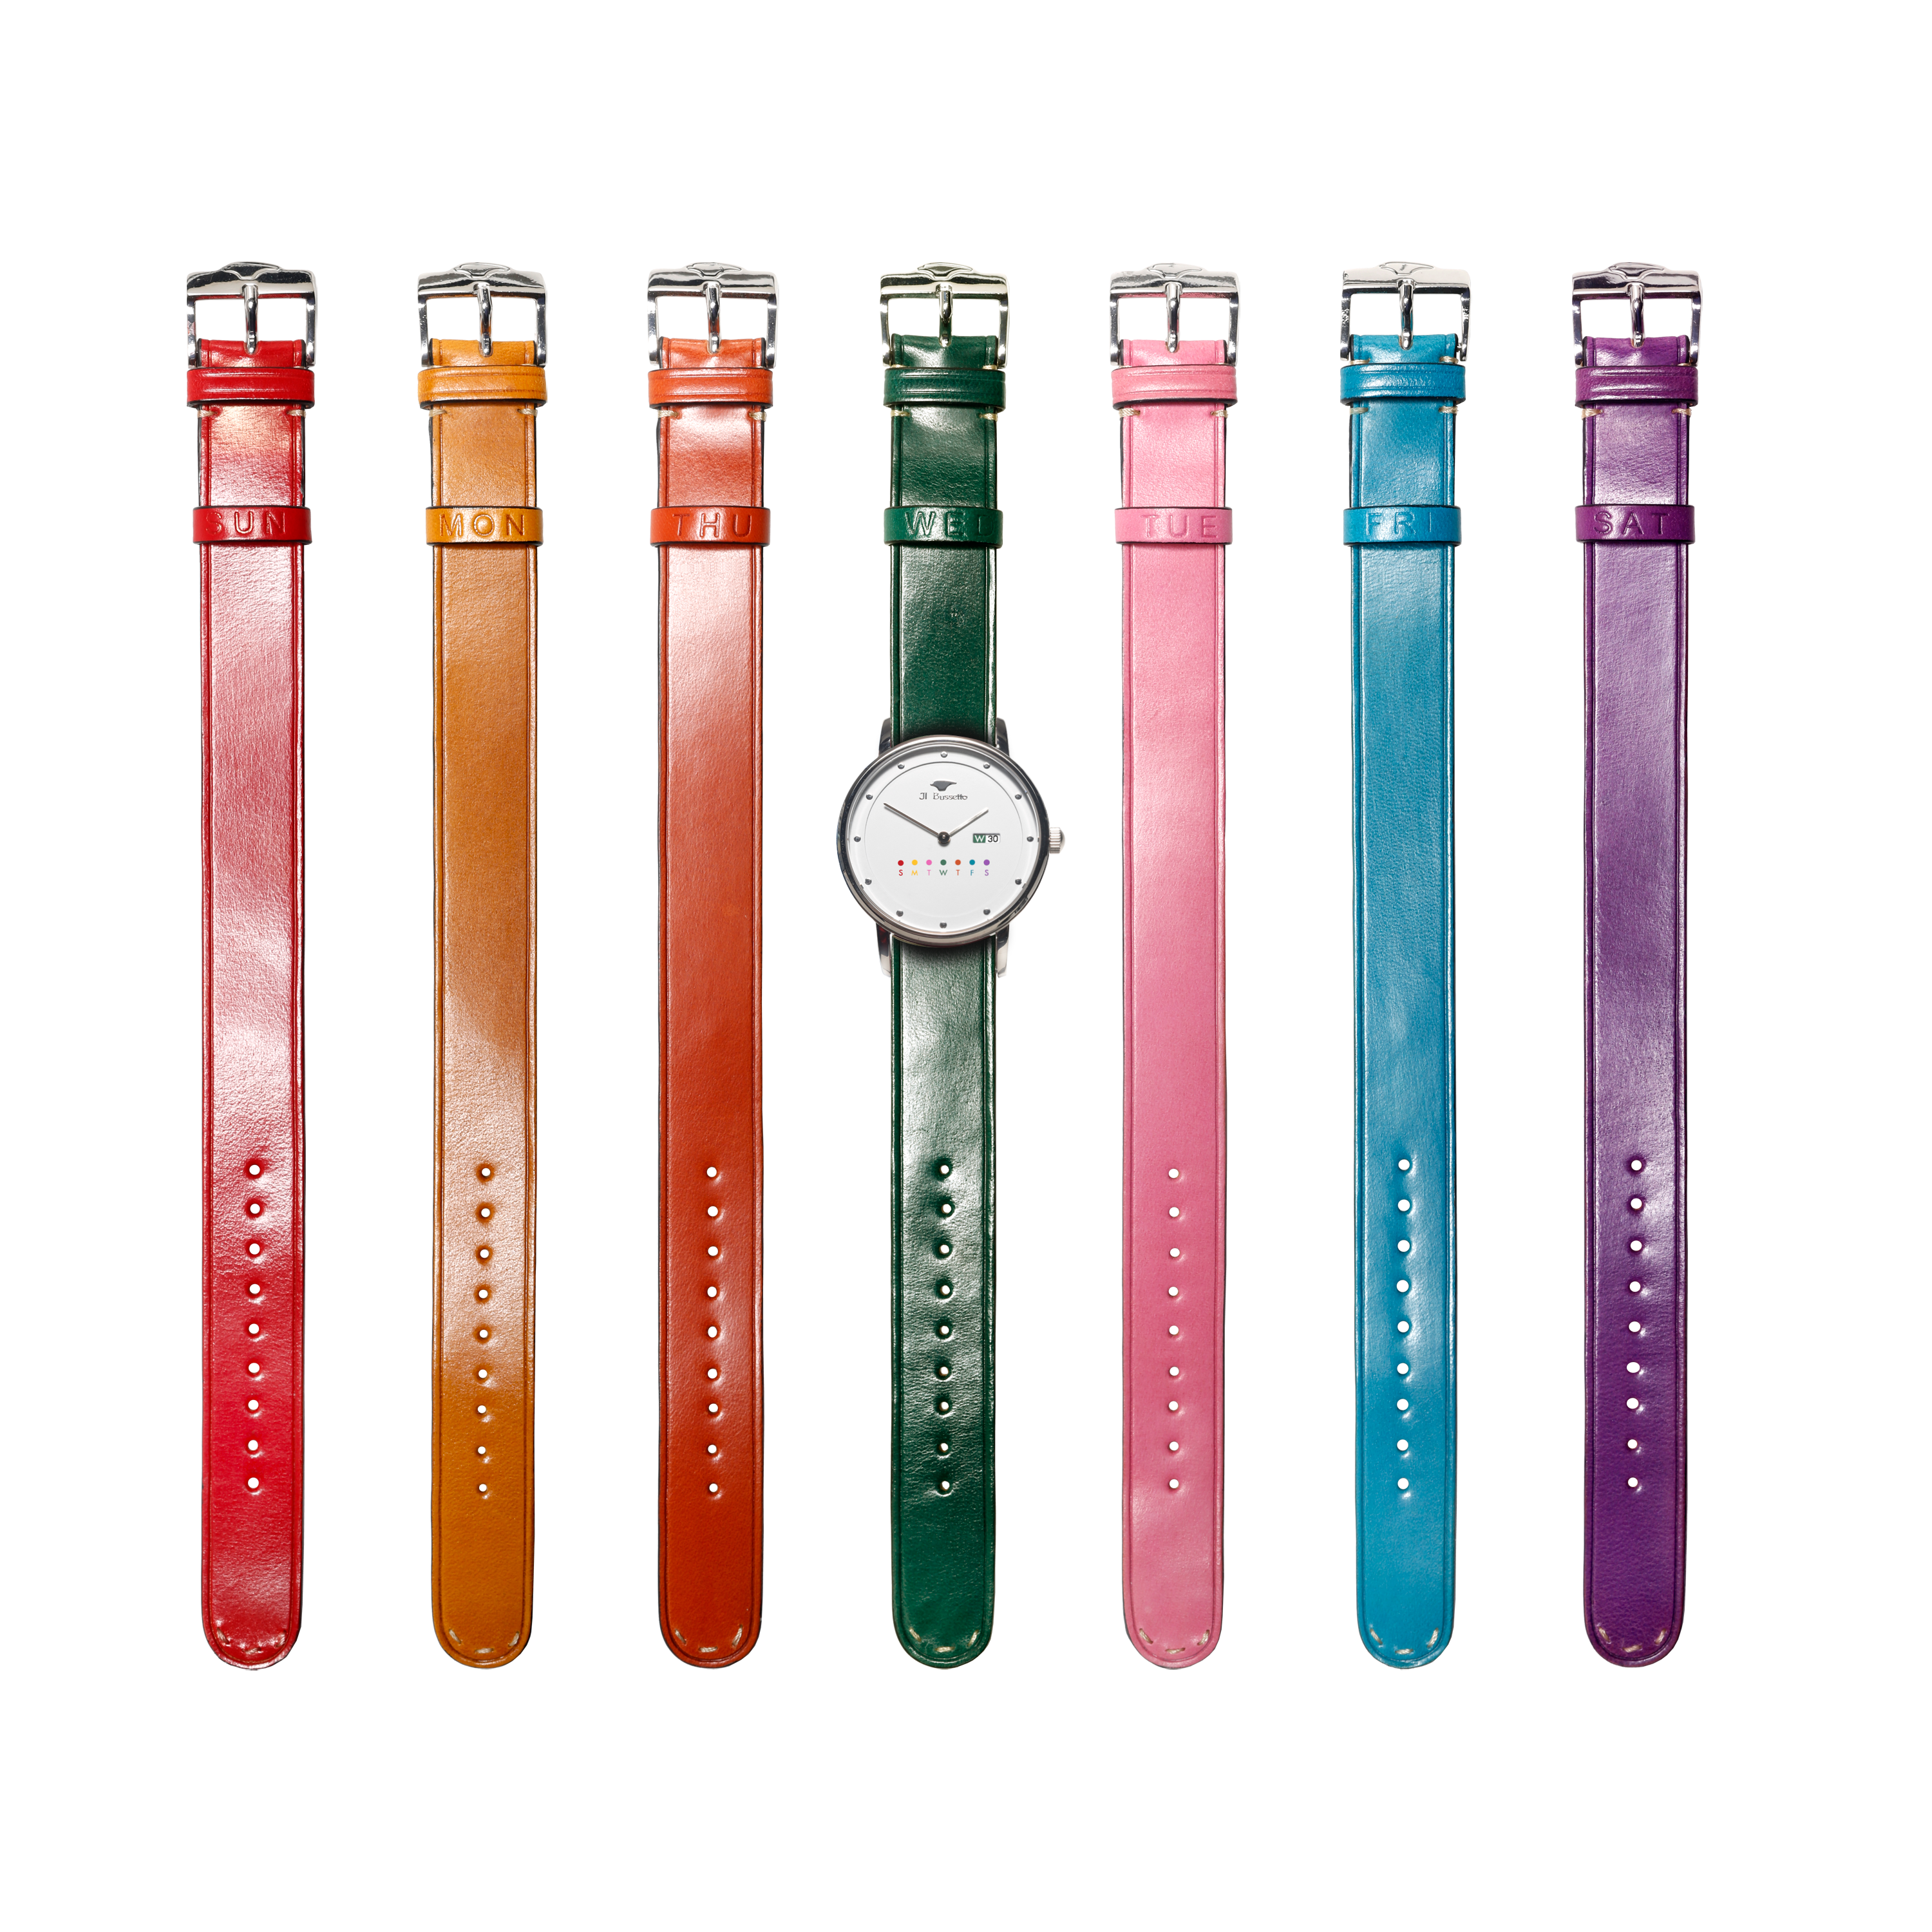 Watch + 7 Leather Watch Straps